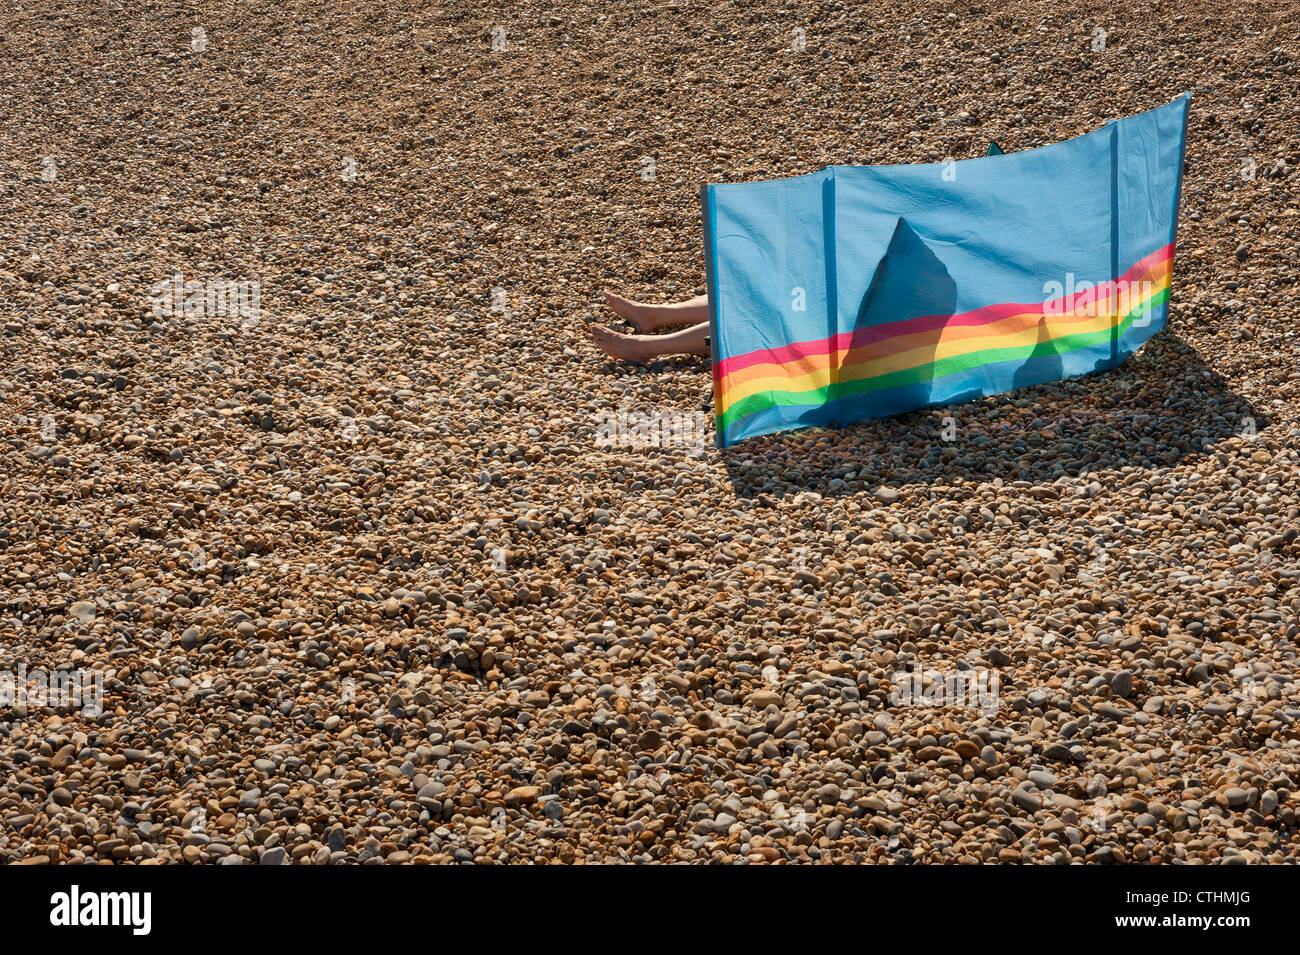 Obscured sun bather lying on a pebble beach and sheltering behind a colourful windbreak Stock Photo